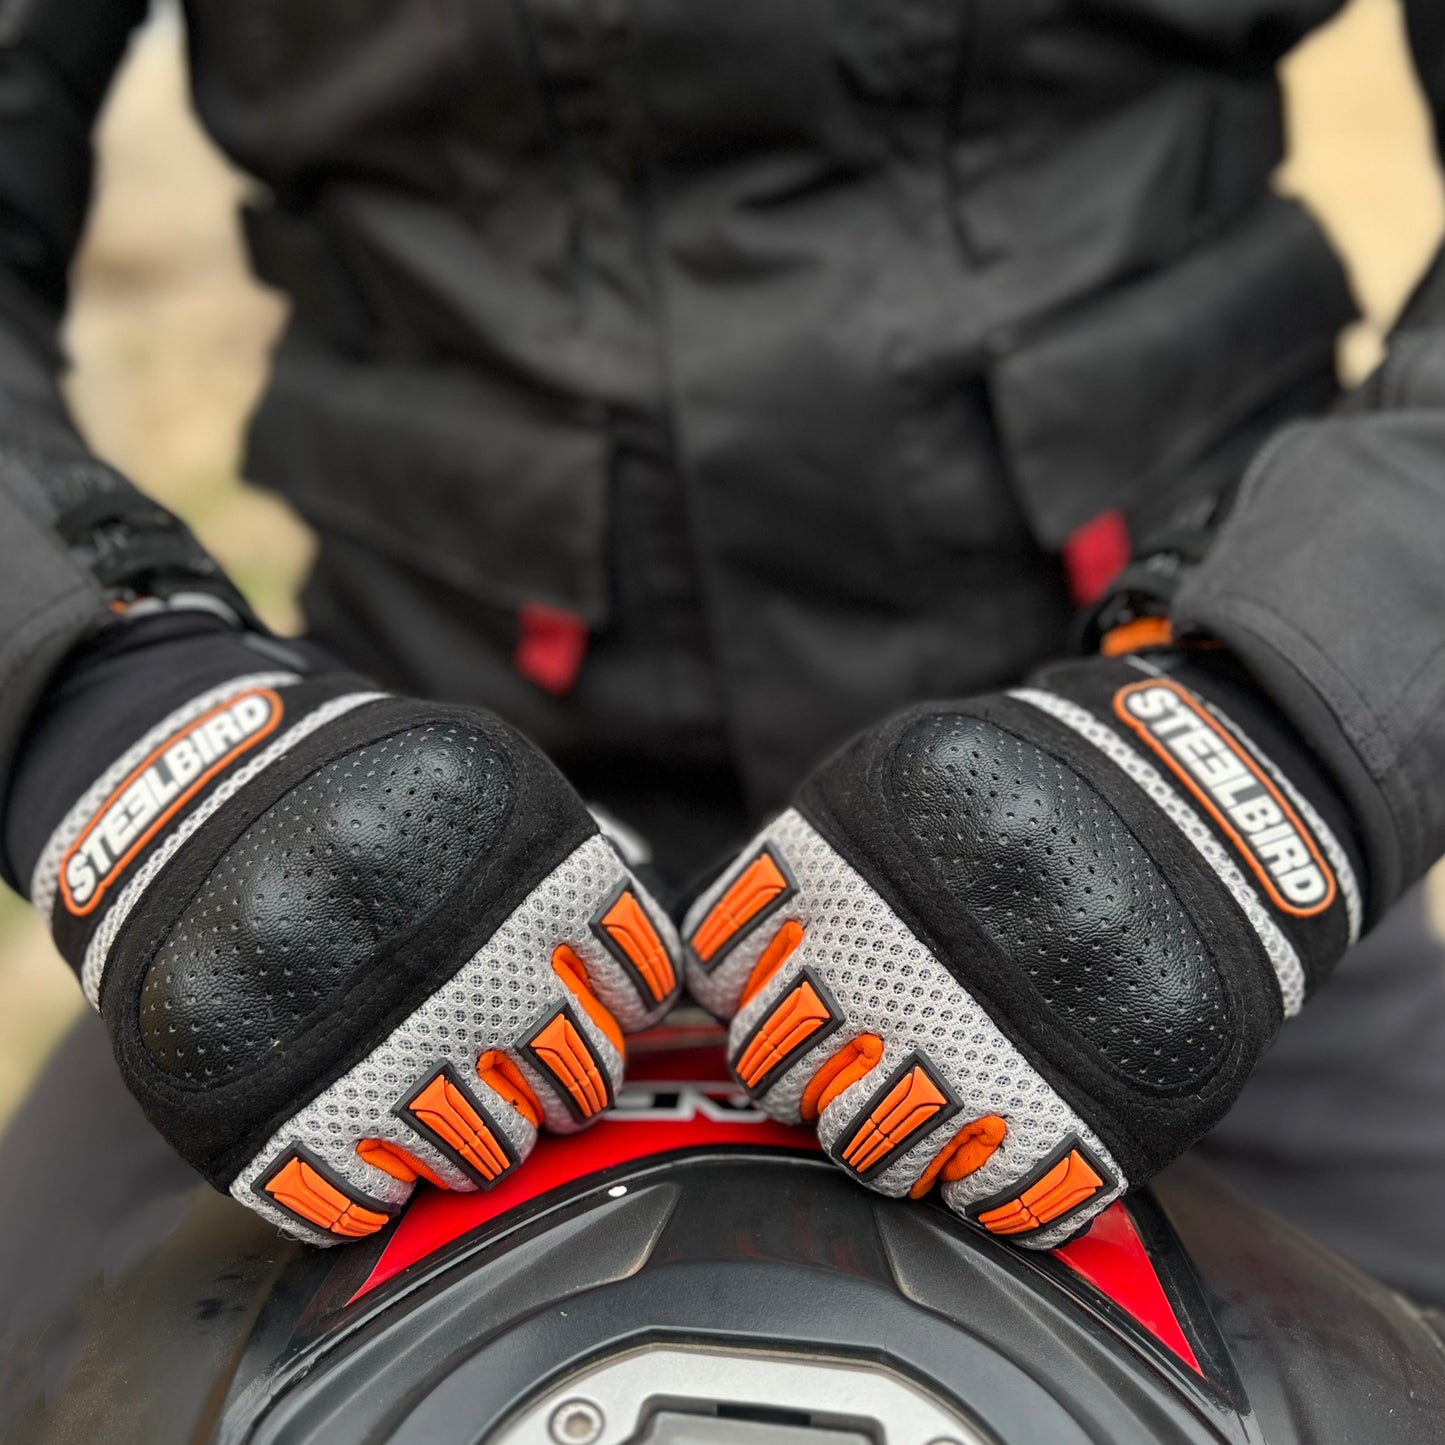 Steelbird Adventure A-1 Full Finger Riding Gloves with Touch Screen Sensitivity at Thumb and Index Finger, Protective Off-Road Motorbike Racing (Orange)